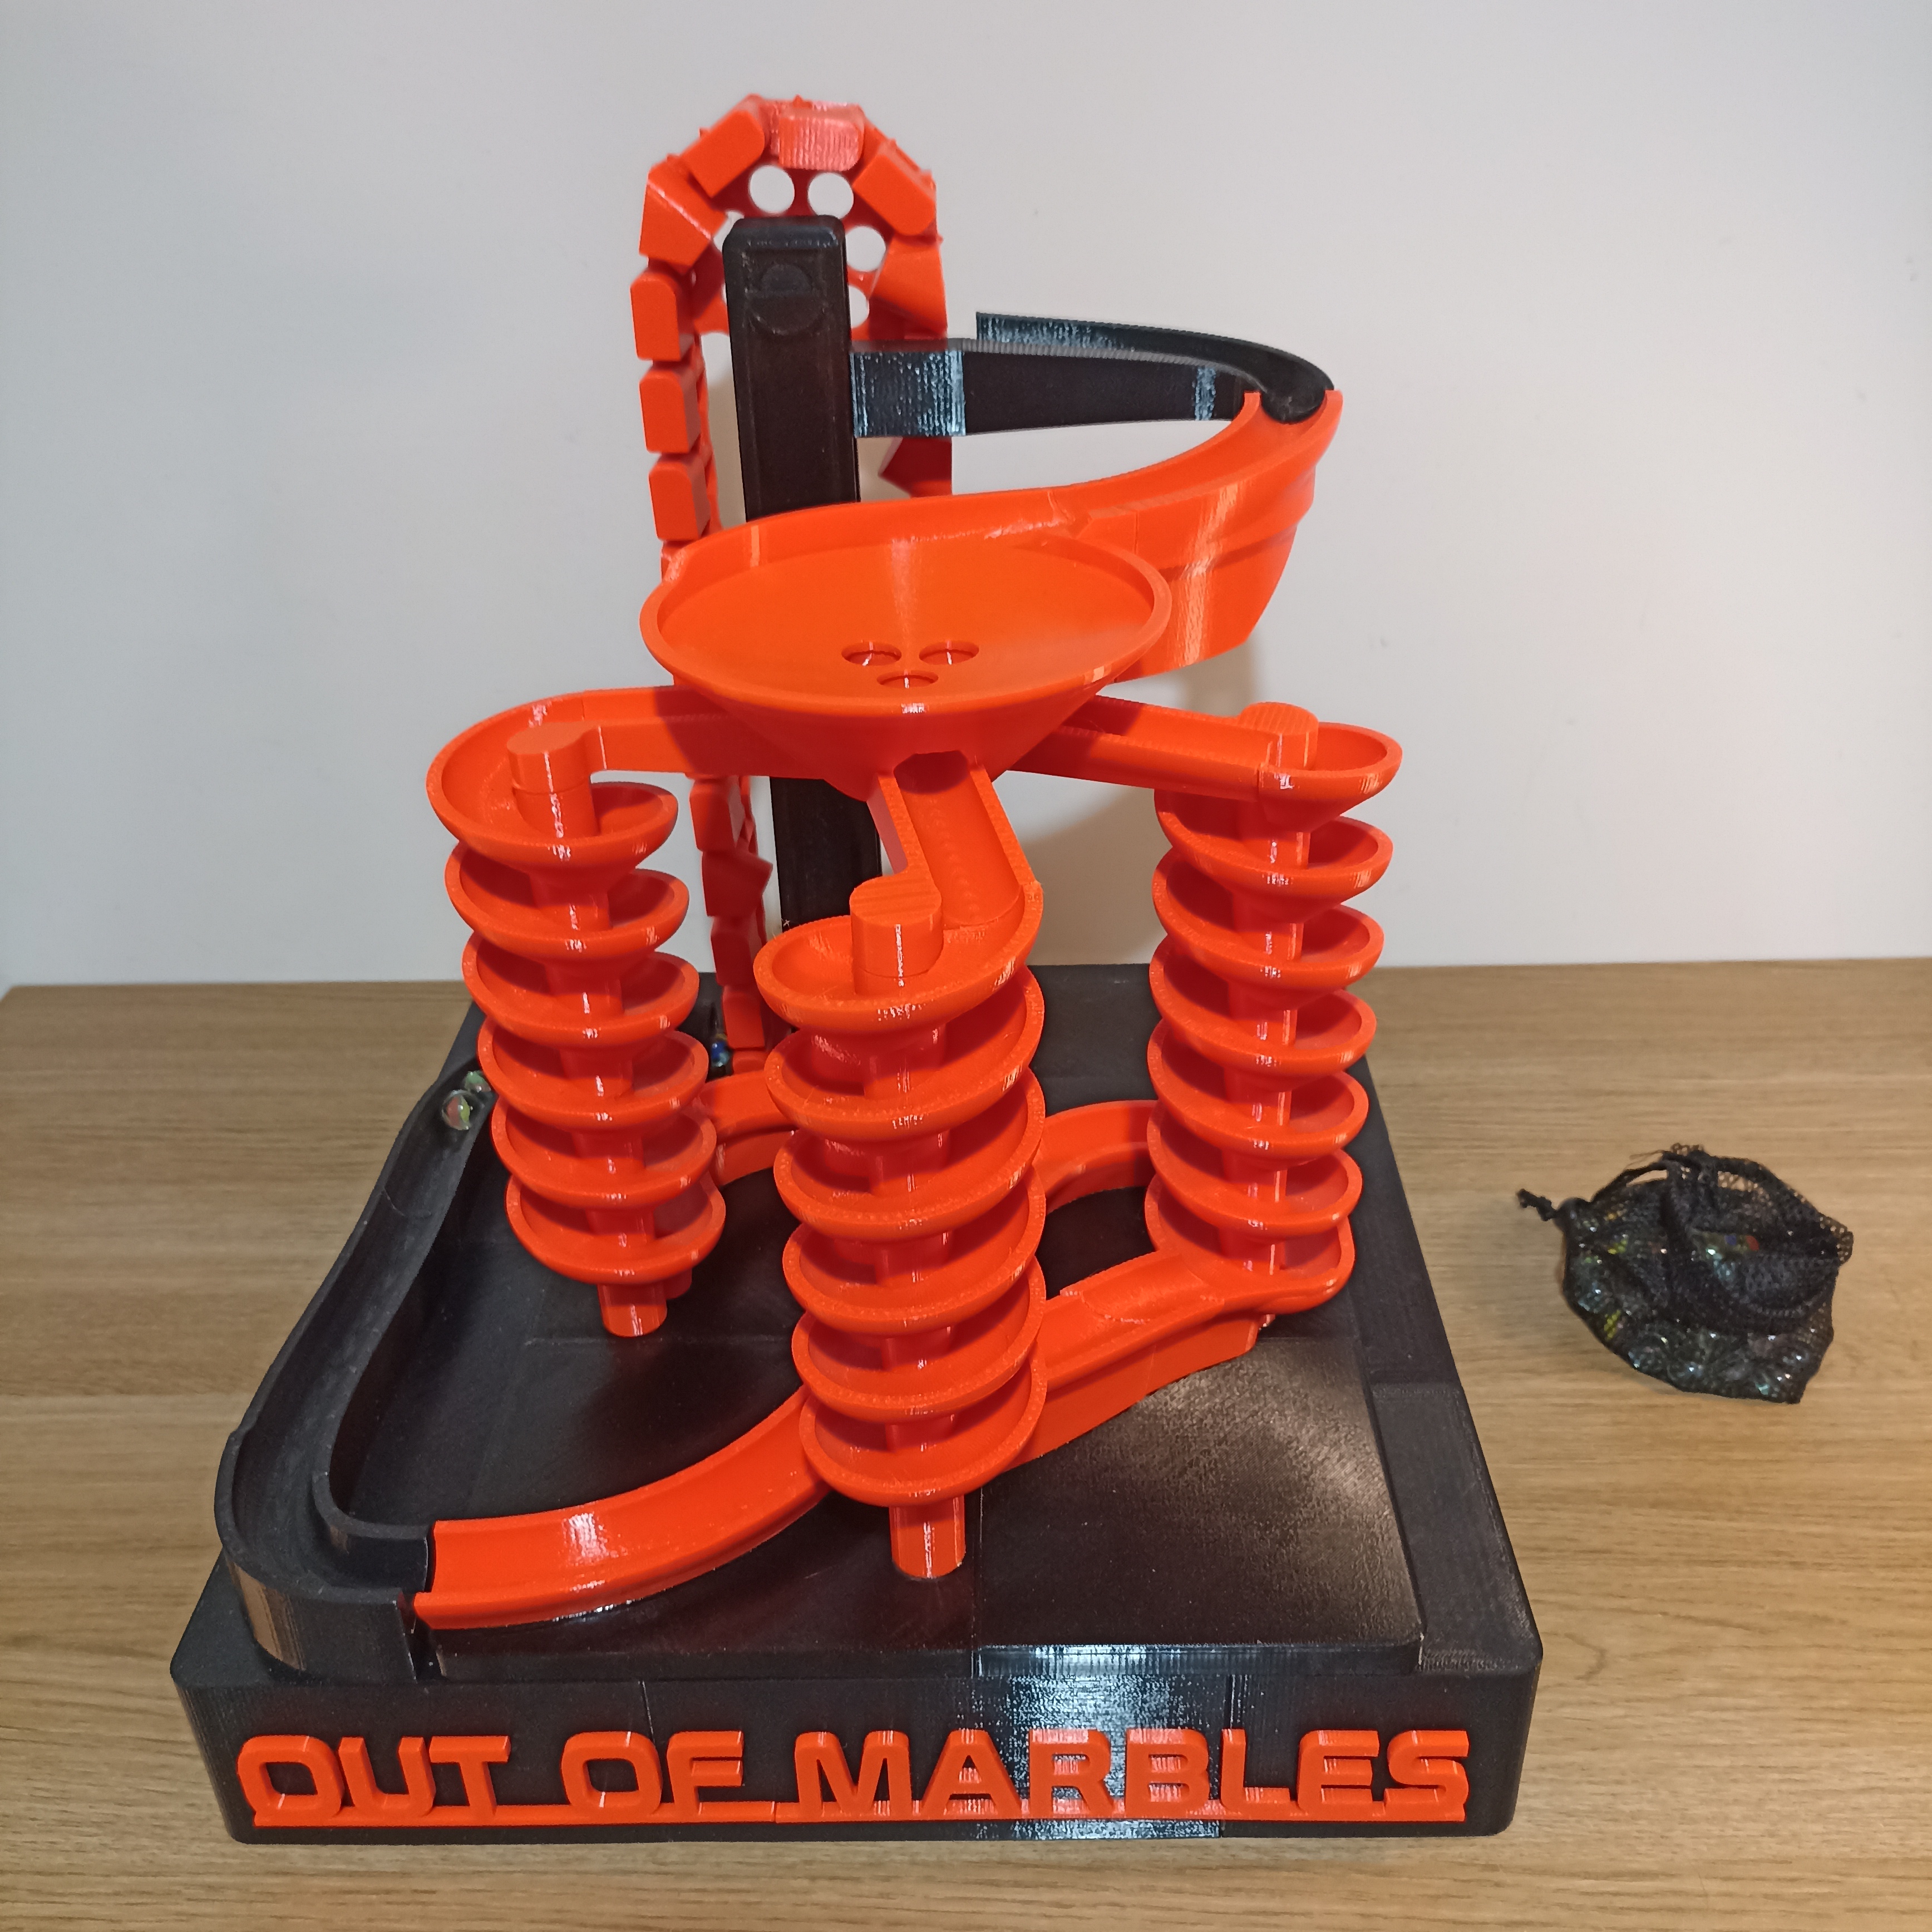 The Bucket Lift - Standard Marble Scale